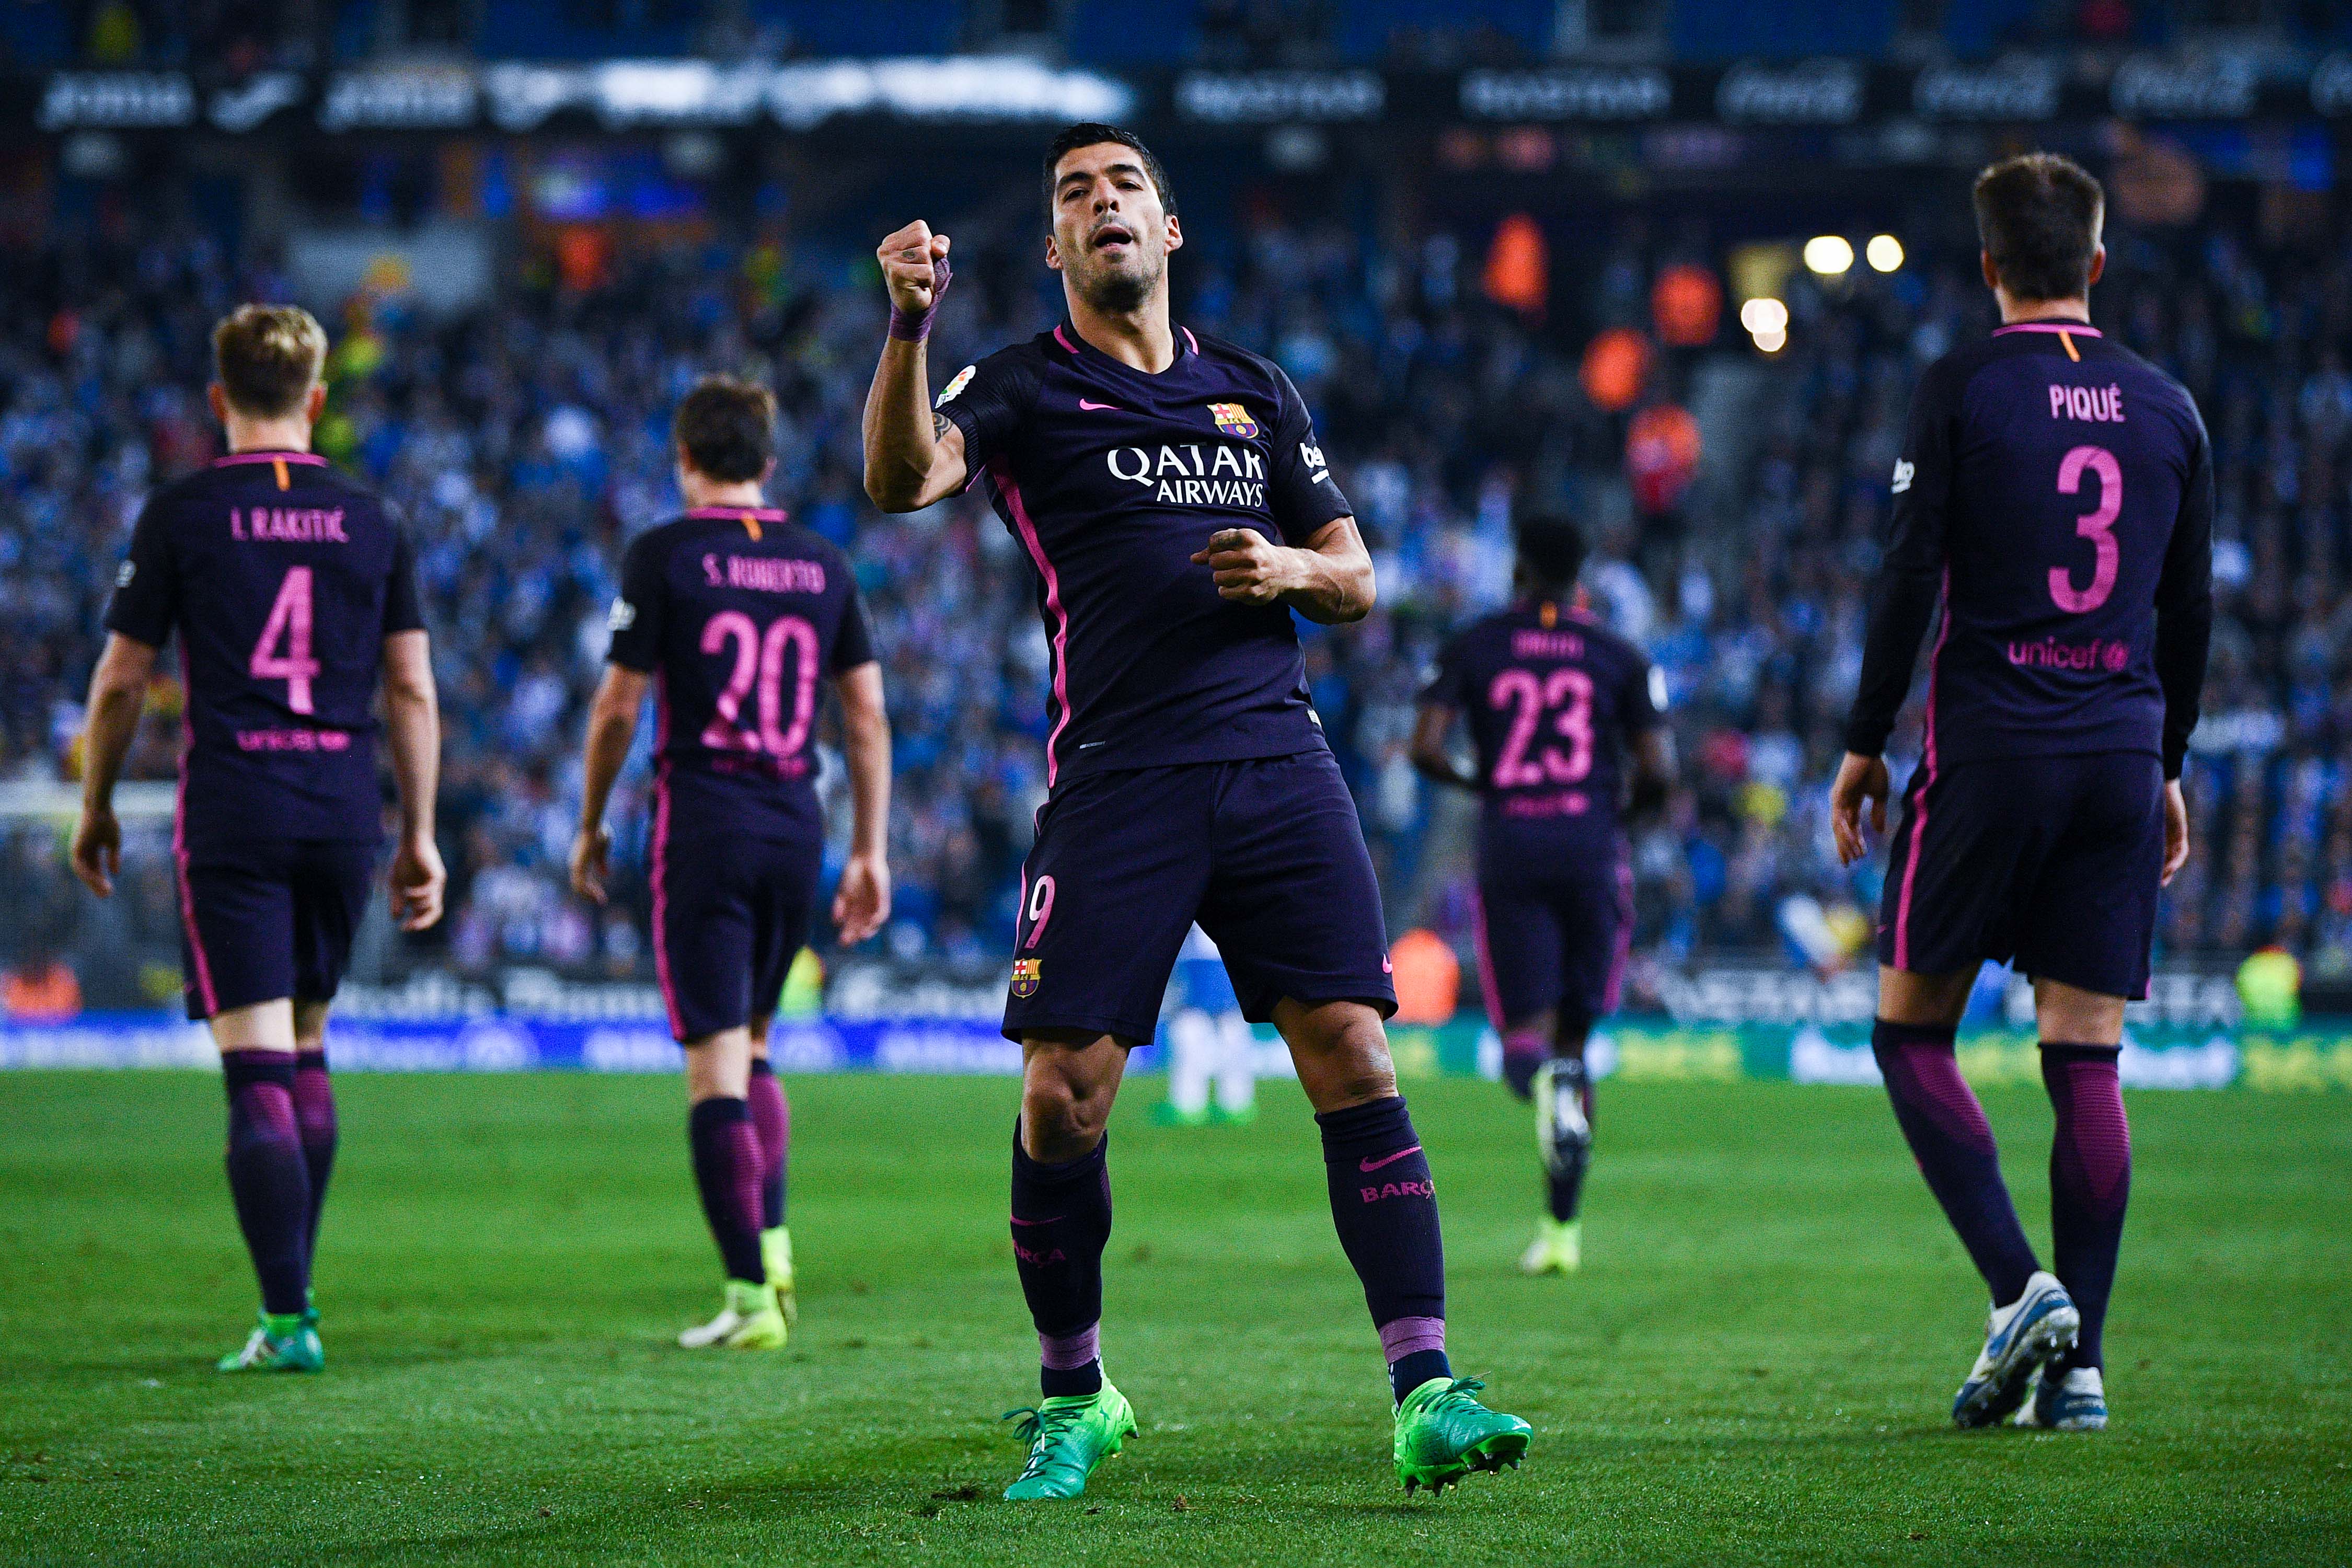 BARCELONA, SPAIN - APRIL 29:  Luis Suarez of FC Barcelona celebrates after scoring the opening goal during the La Liga match between RCD Espanyol and FC Barcelona at the RCDE Stadium on April 29, 2017 in Barcelona, Spaain.  (Photo by David Ramos/Getty Images)